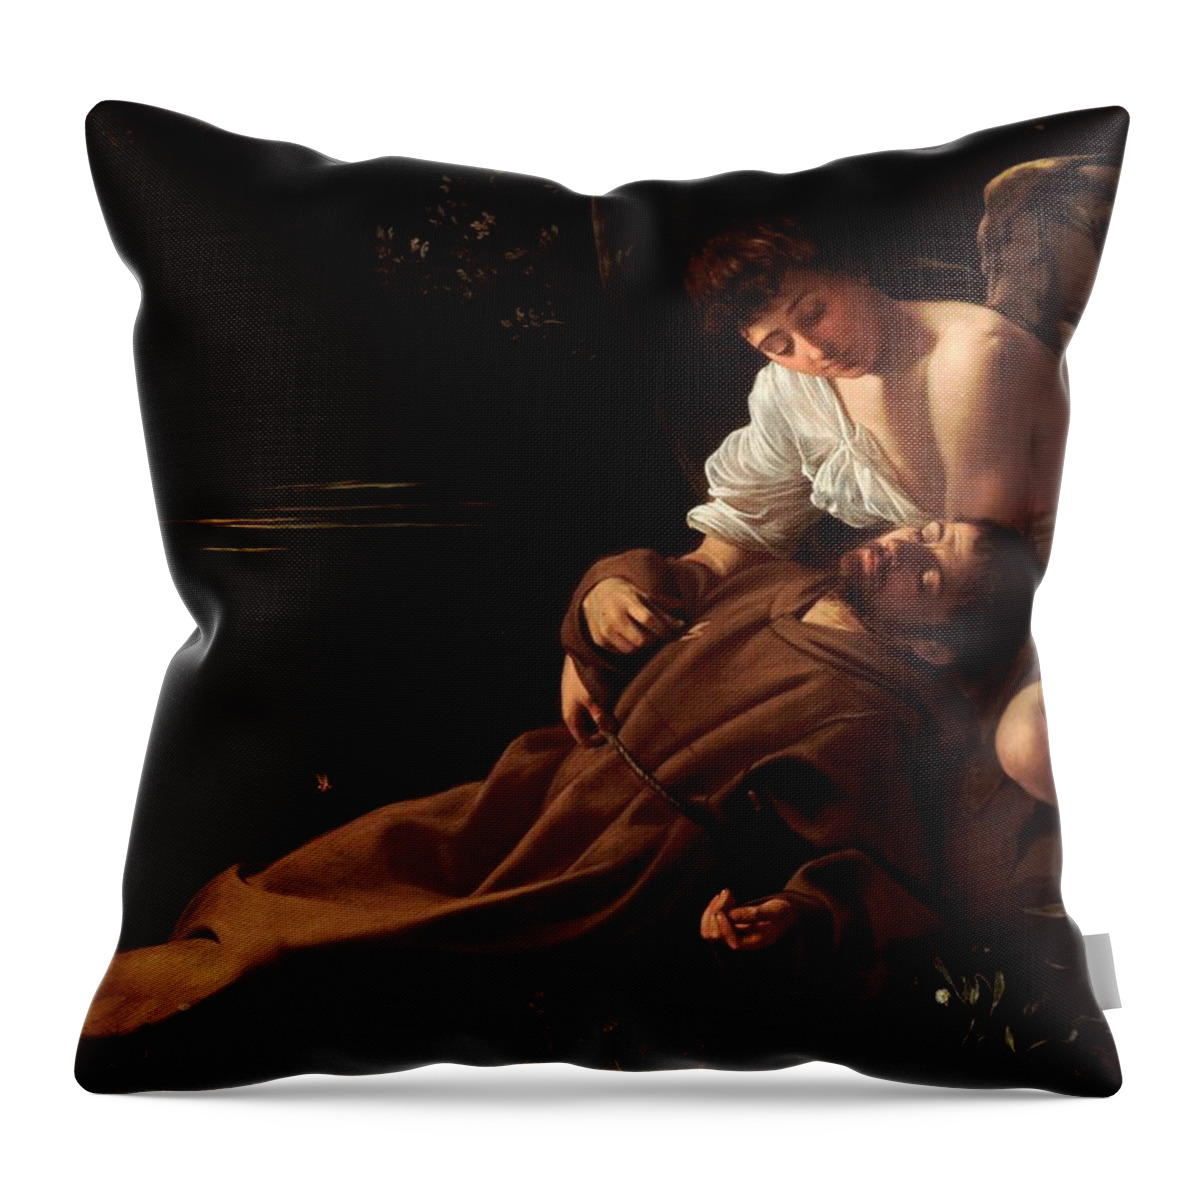 Saint Francis Of Assisi At The Moment Of Receiving The Signs Of The Stigmata Throw Pillow featuring the painting Saint Francis of Assisi by Celestial Images